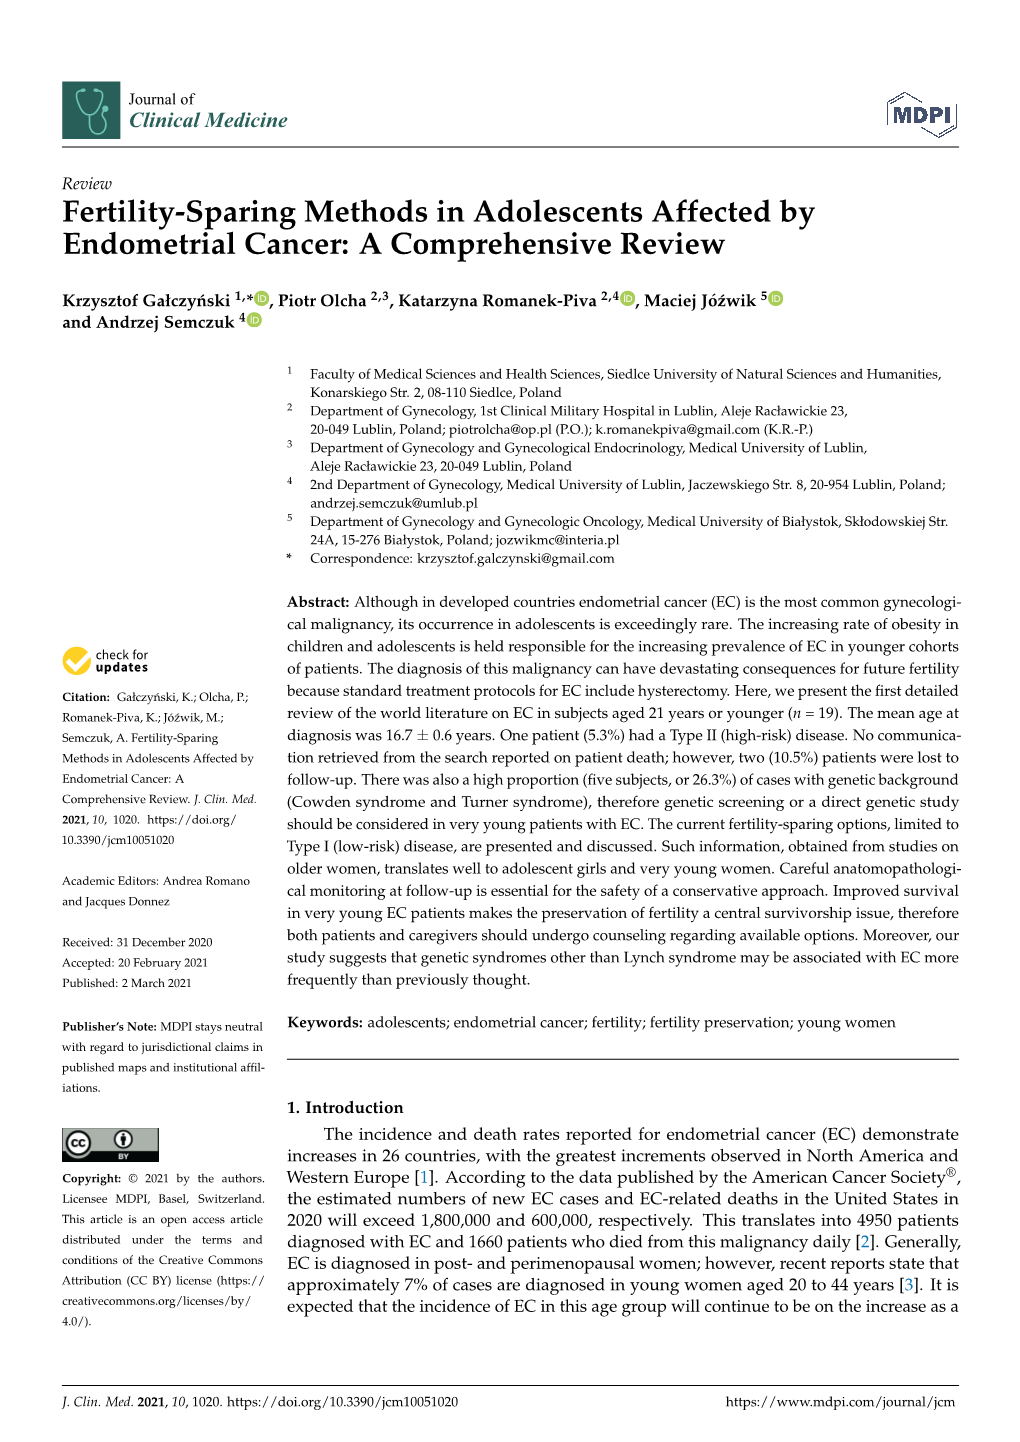 Fertility-Sparing Methods in Adolescents Affected by Endometrial Cancer: a Comprehensive Review